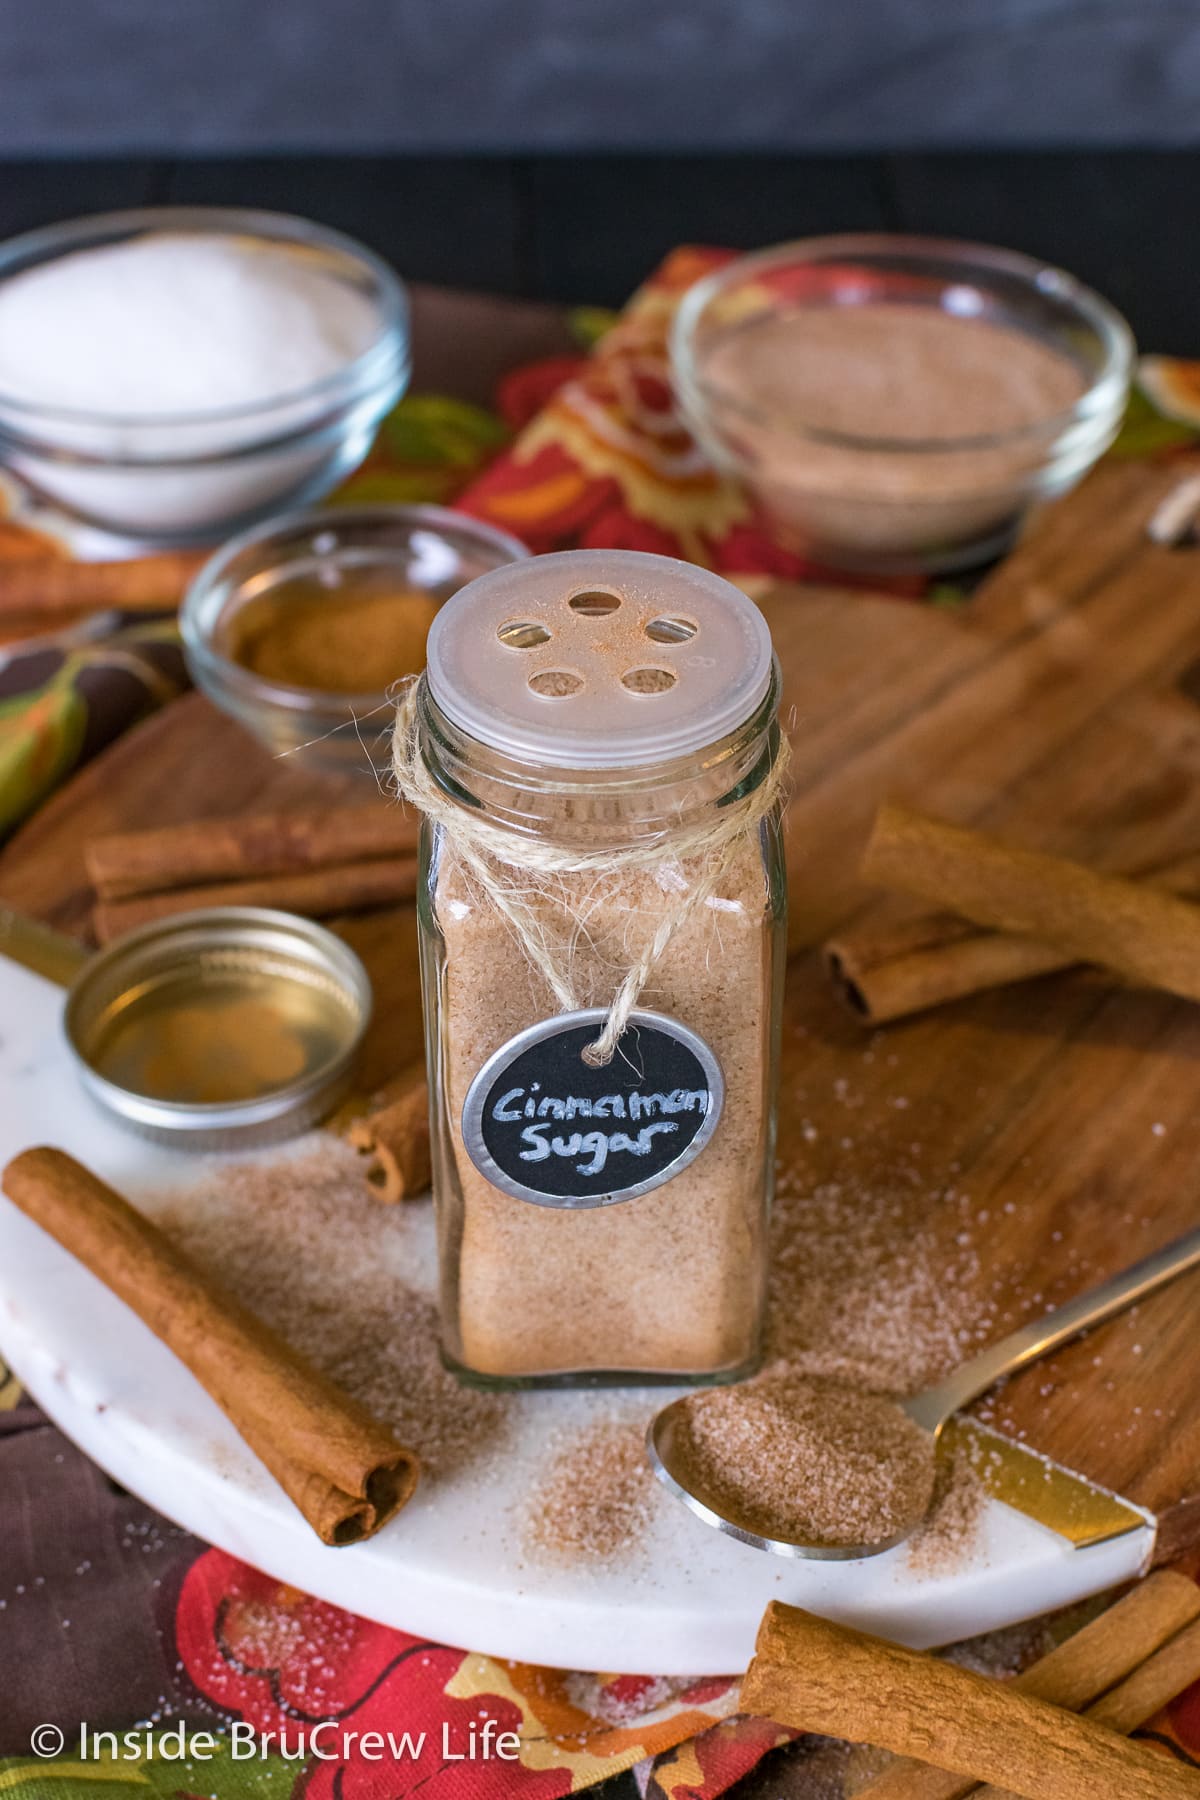 A clear spice jar with a shaker top filled with cinnamon and sugar mix.